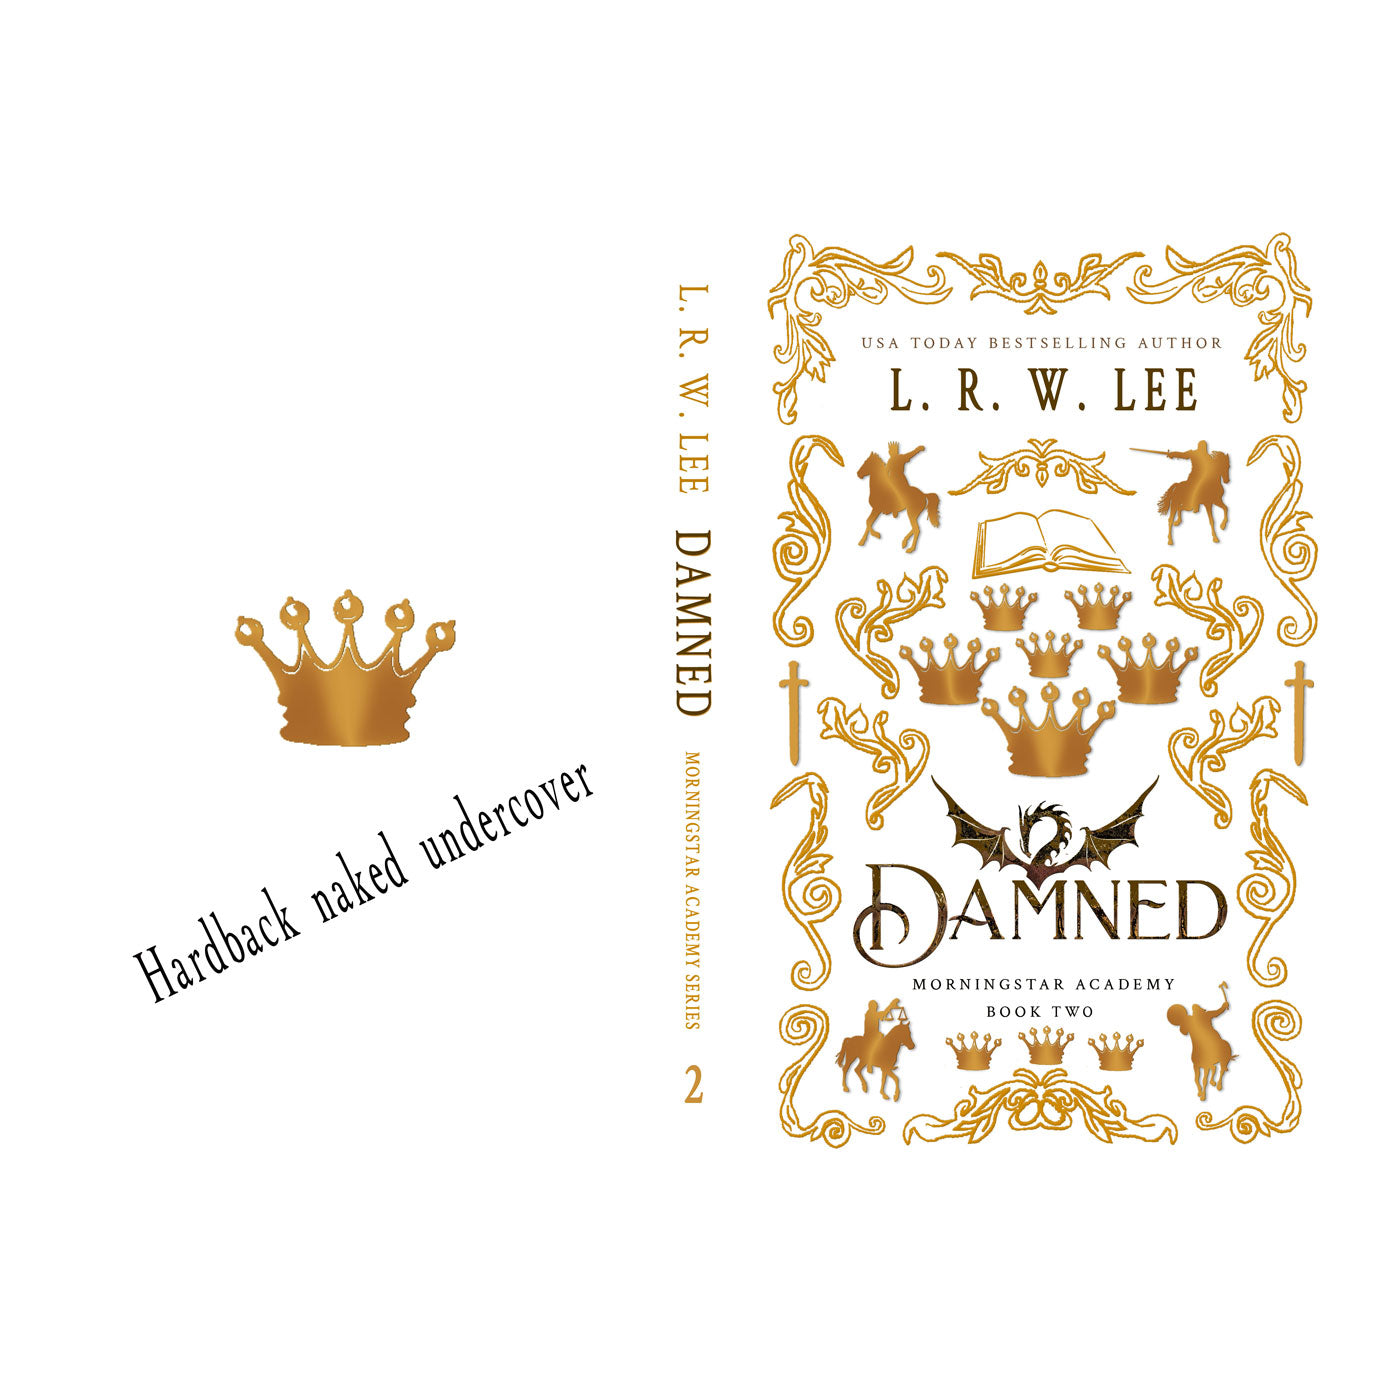 Cursed and Damned Hardcover Book Bundle (Autographed)